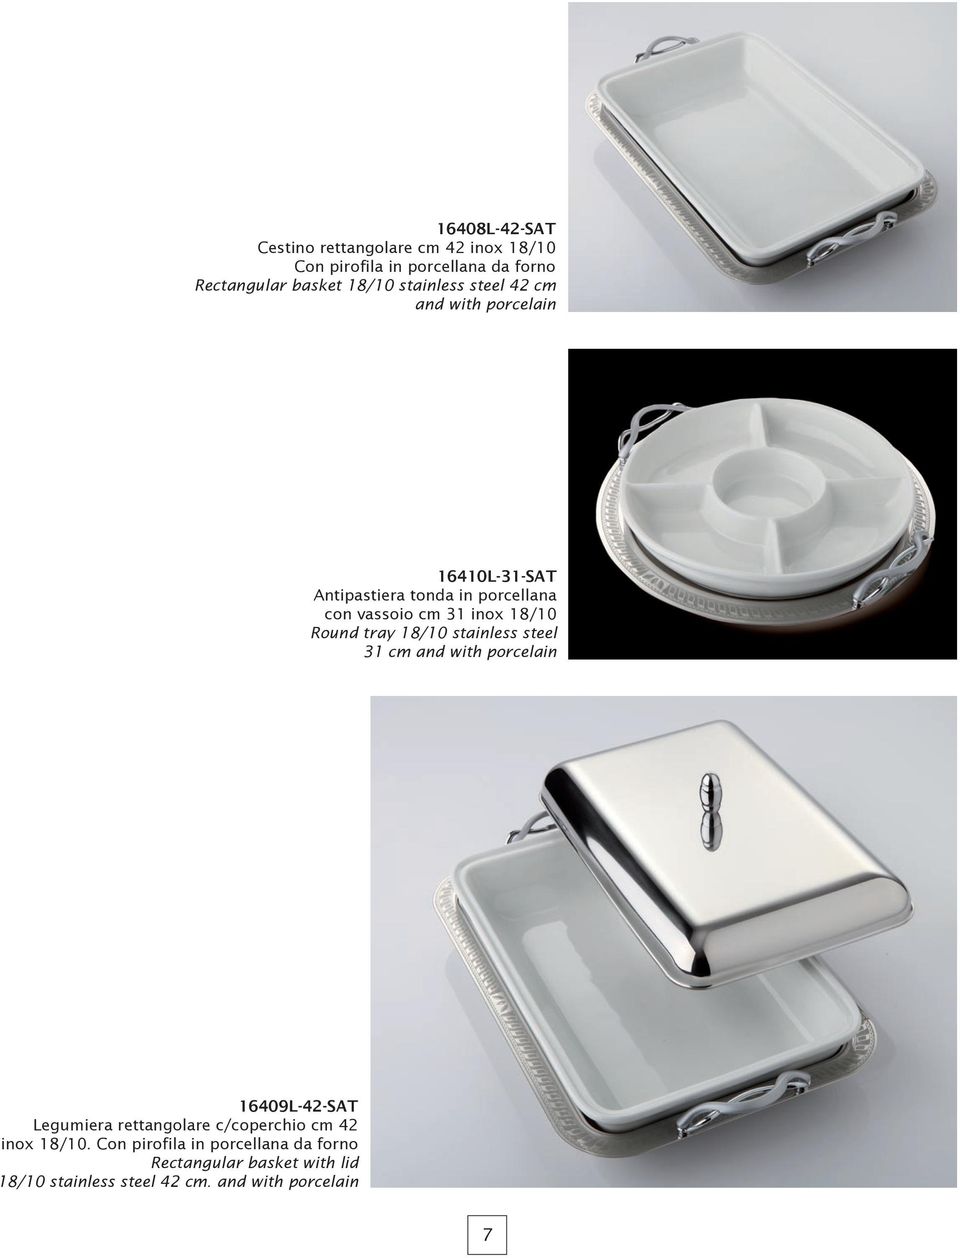 Round tray 18/10 stainless steel 31 cm and with porcelain 16409L-42-SAT Legumiera rettangolare c/coperchio cm 42